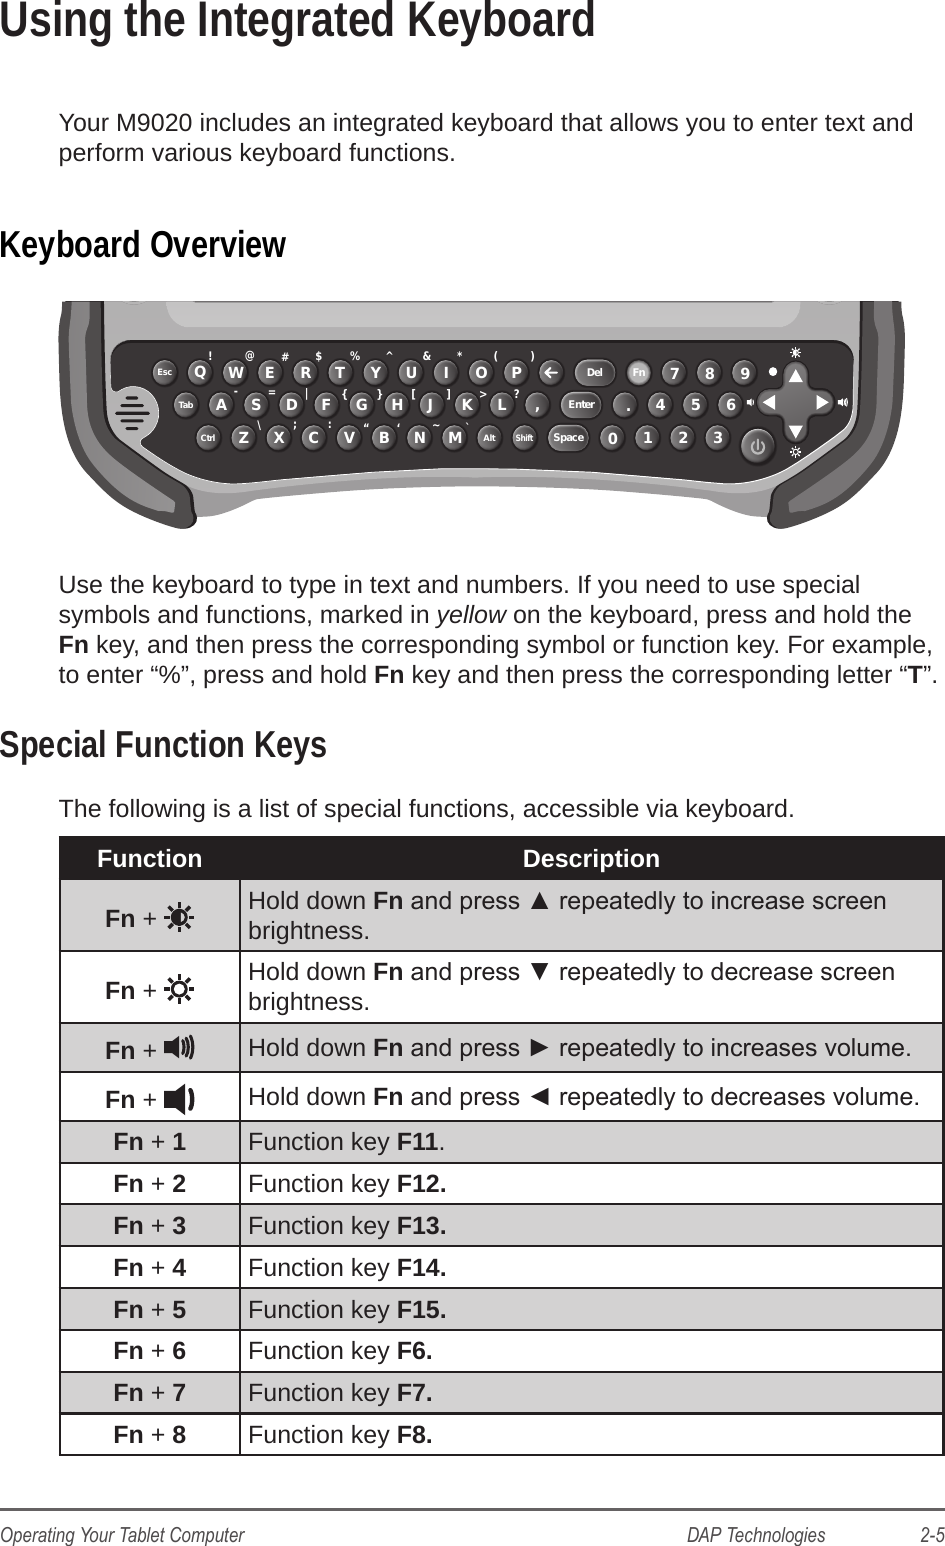 DAP Technologies                    2-5Operating Your Tablet ComputerUsing the Integrated KeyboardYour M9020 includes an integrated keyboard that allows you to enter text and perform various keyboard functions.Keyboard Overview  EscTabCtrlQAZXCVBNM0123456789AltShiftSDFGHJKLEnterSpaceDel Fn,.WERTYU IOP!@-=#$%^&amp; *(?&gt;][}{)|;\:“‘ ~`F1F2F4F3F5Use the keyboard to type in text and numbers. If you need to use special symbols and functions, marked in yellow on the keyboard, press and hold the Fn key, and then press the corresponding symbol or function key. For example, to enter “%”, press and hold Fn key and then press the corresponding letter “T”.Special Function KeysThe following is a list of special functions, accessible via keyboard.Function DescriptionFn +  Hold down Fn and press ▲ repeatedly to increase screen brightness.Fn +  Hold down Fn and press ▼ repeatedly to decrease screen brightness.Fn +  Hold down Fn and press ► repeatedly to increases volume.Fn +  Hold down Fn and press ◄ repeatedly to decreases volume.Fn + 1Function key F11.Fn + 2Function key F12.Fn + 3Function key F13.Fn + 4Function key F14.Fn + 5Function key F15.Fn + 6Function key F6.  Fn + 7Function key F7.Fn + 8Function key F8.